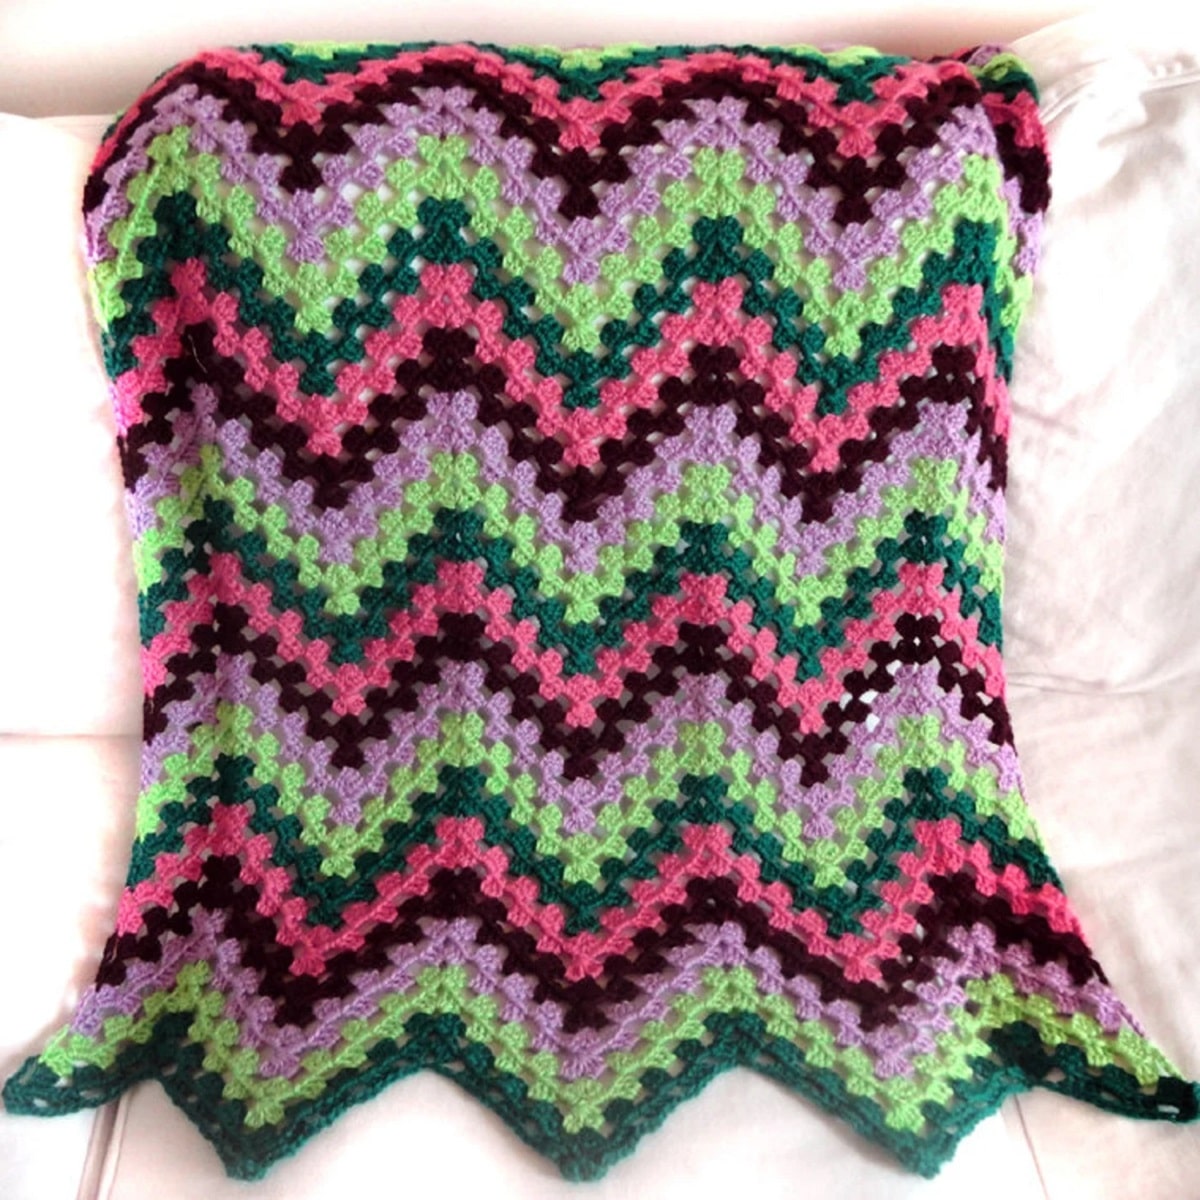 Black, pink, gray, and purple zig-zag striped crochet blanket using a granny ripple stitch draped over a cream couch.